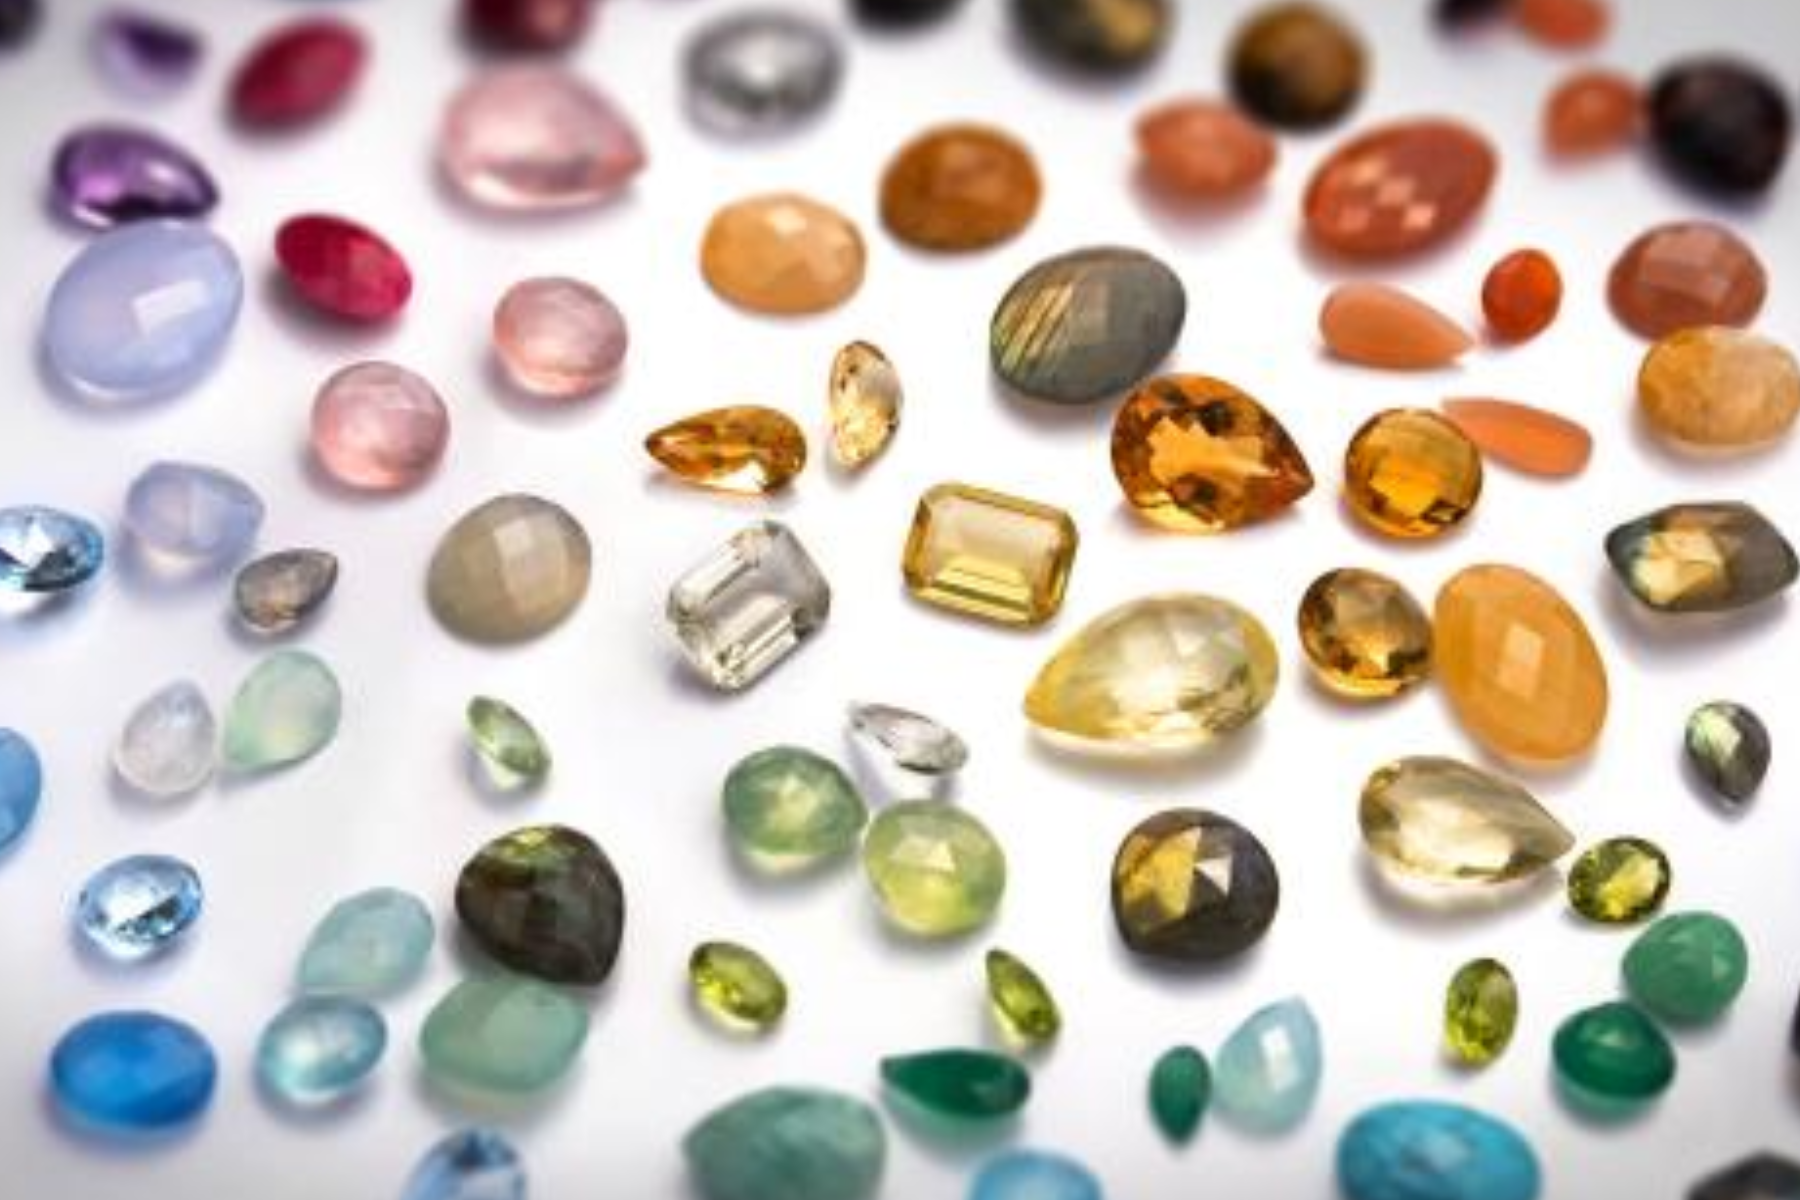 An image of various birthstones